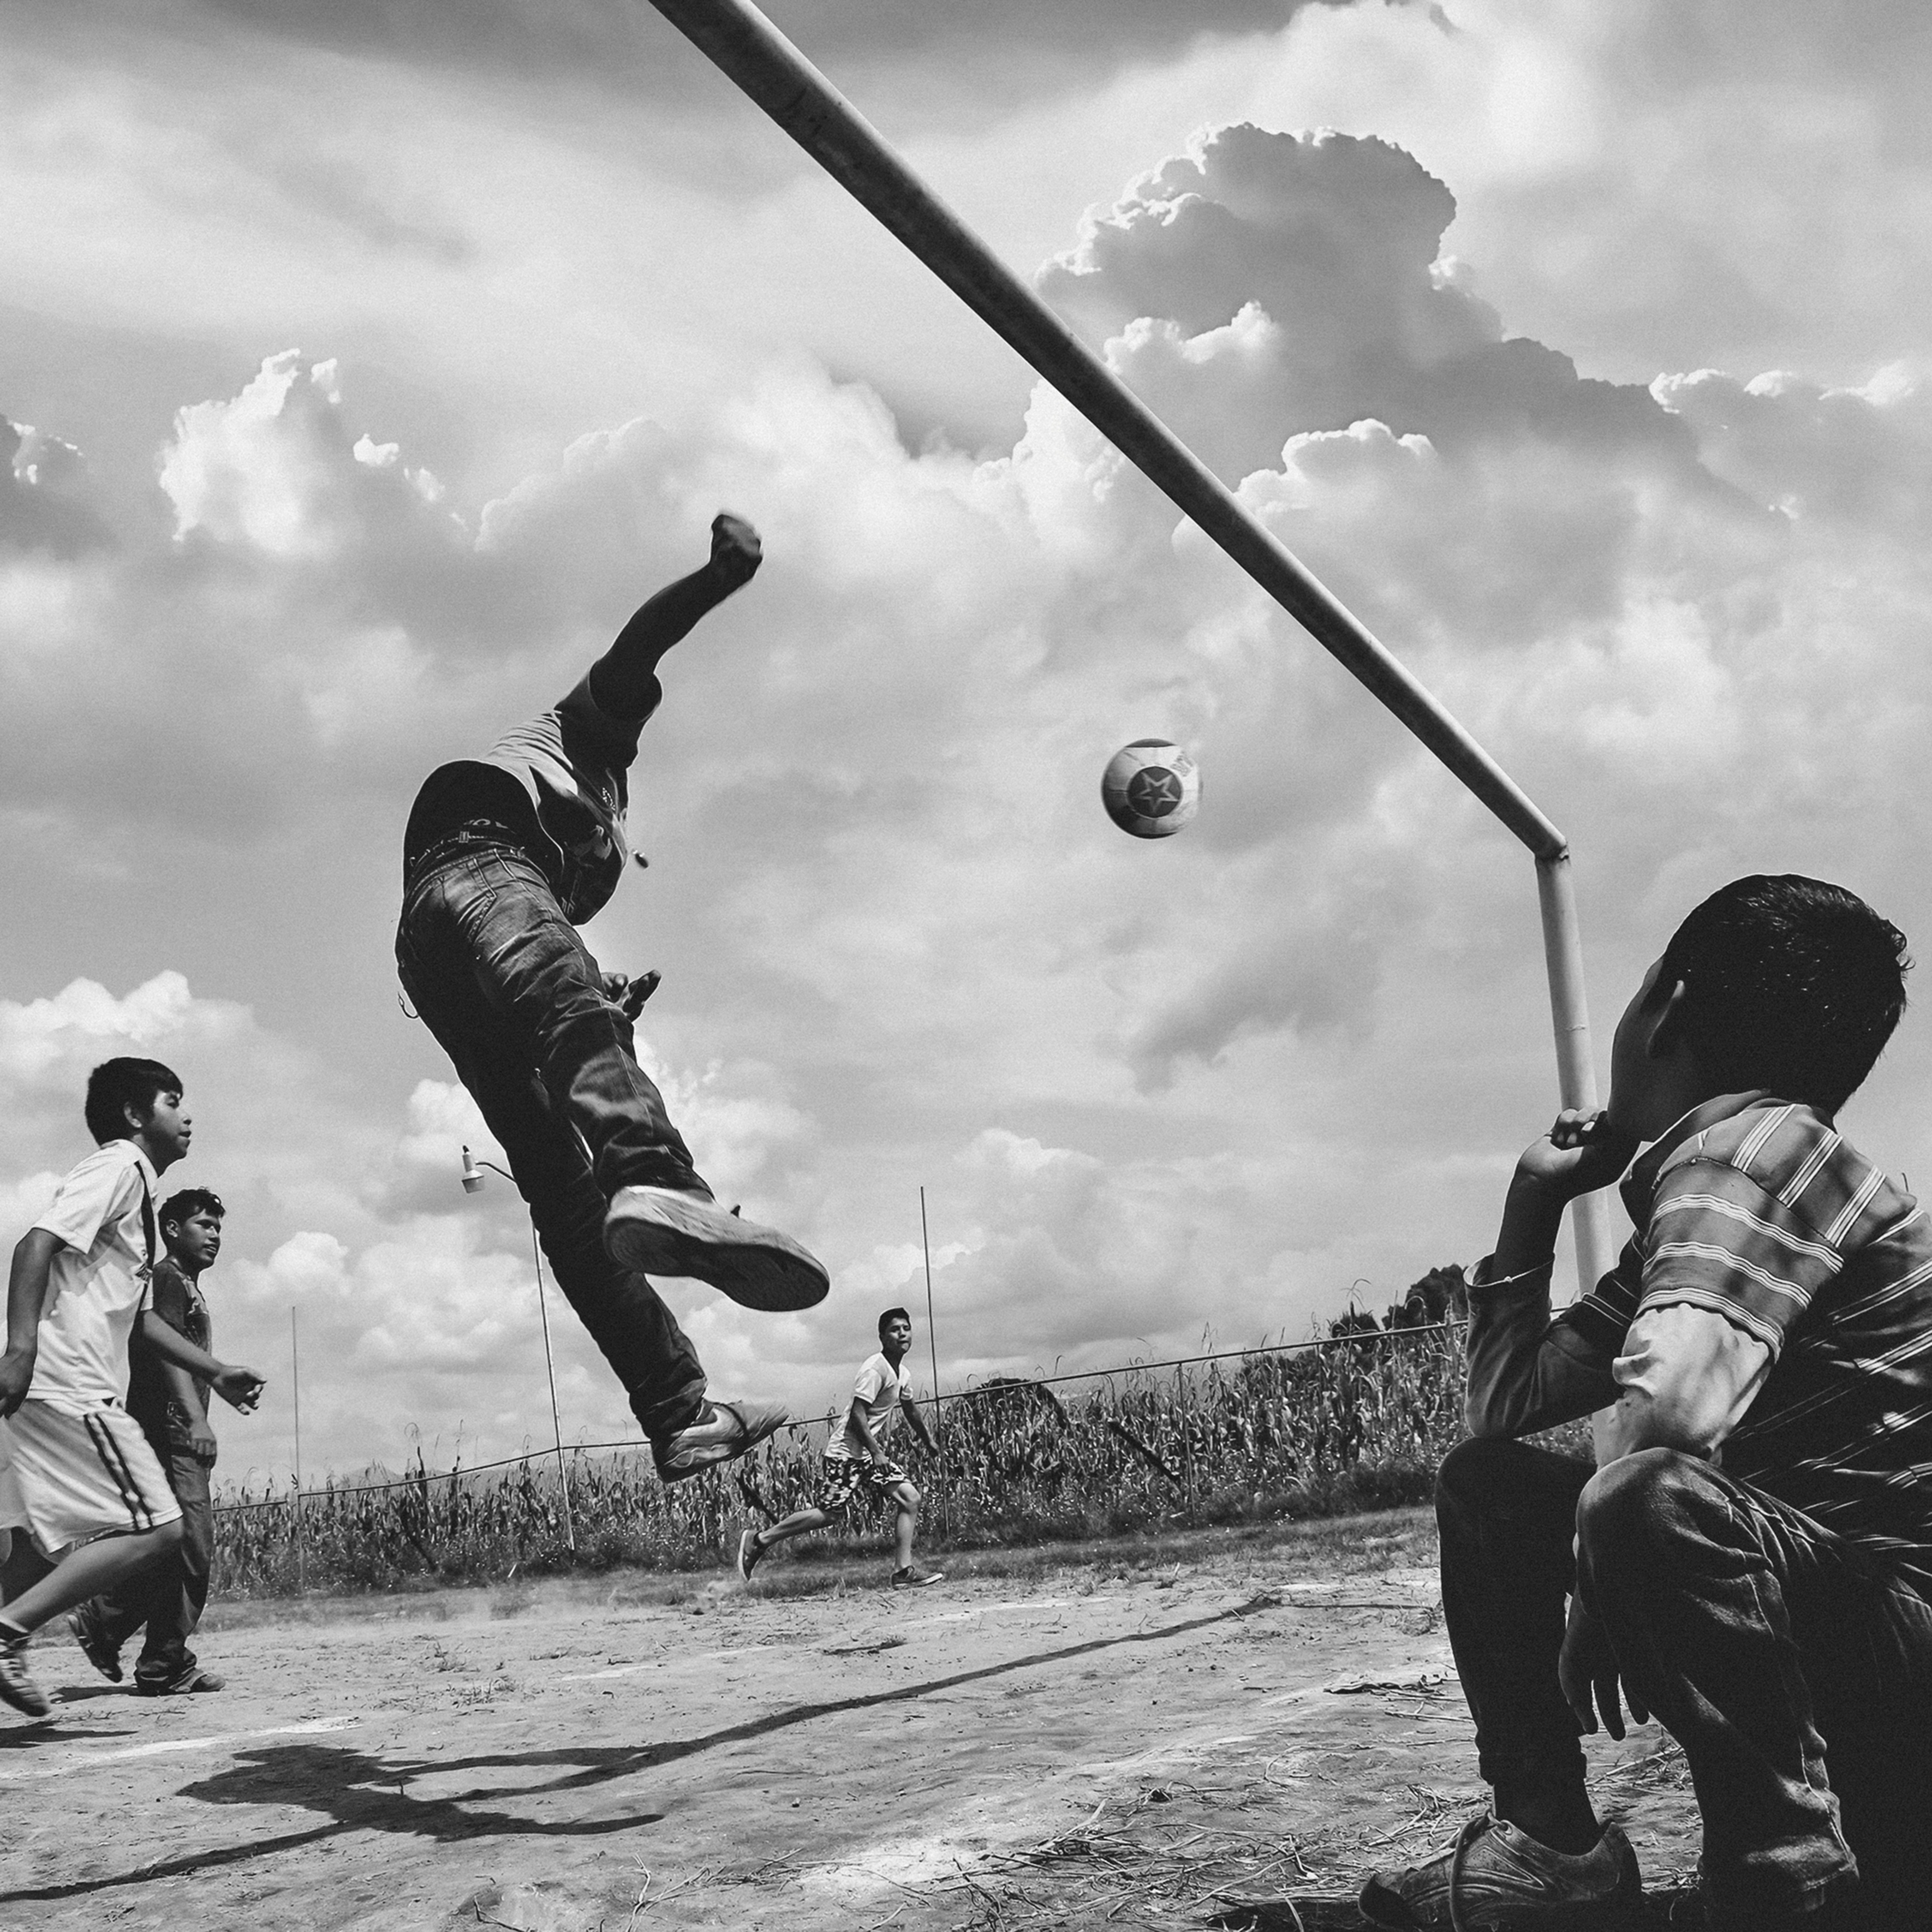 Children play soccer in the marginalised areas of Mexico City.